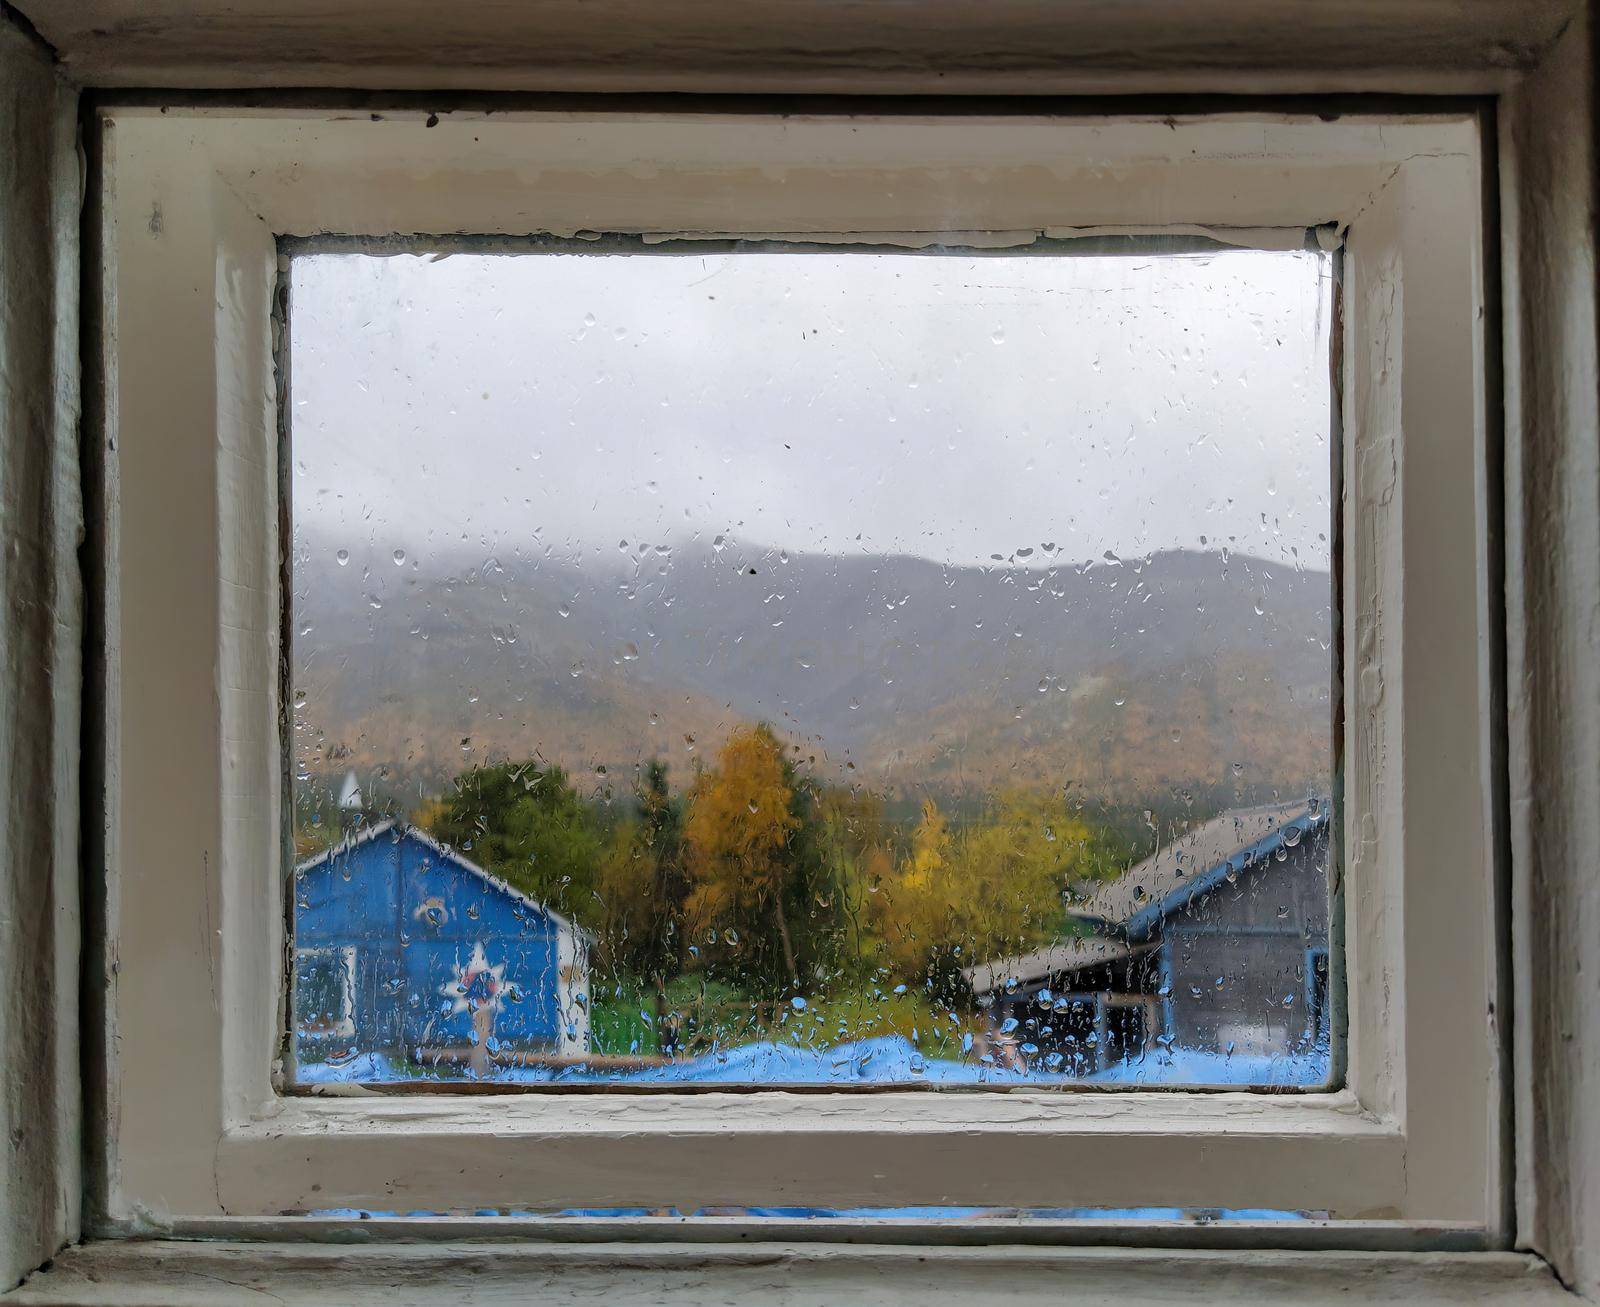 Rainy autumn day seen from a cottage window by Andre1ns